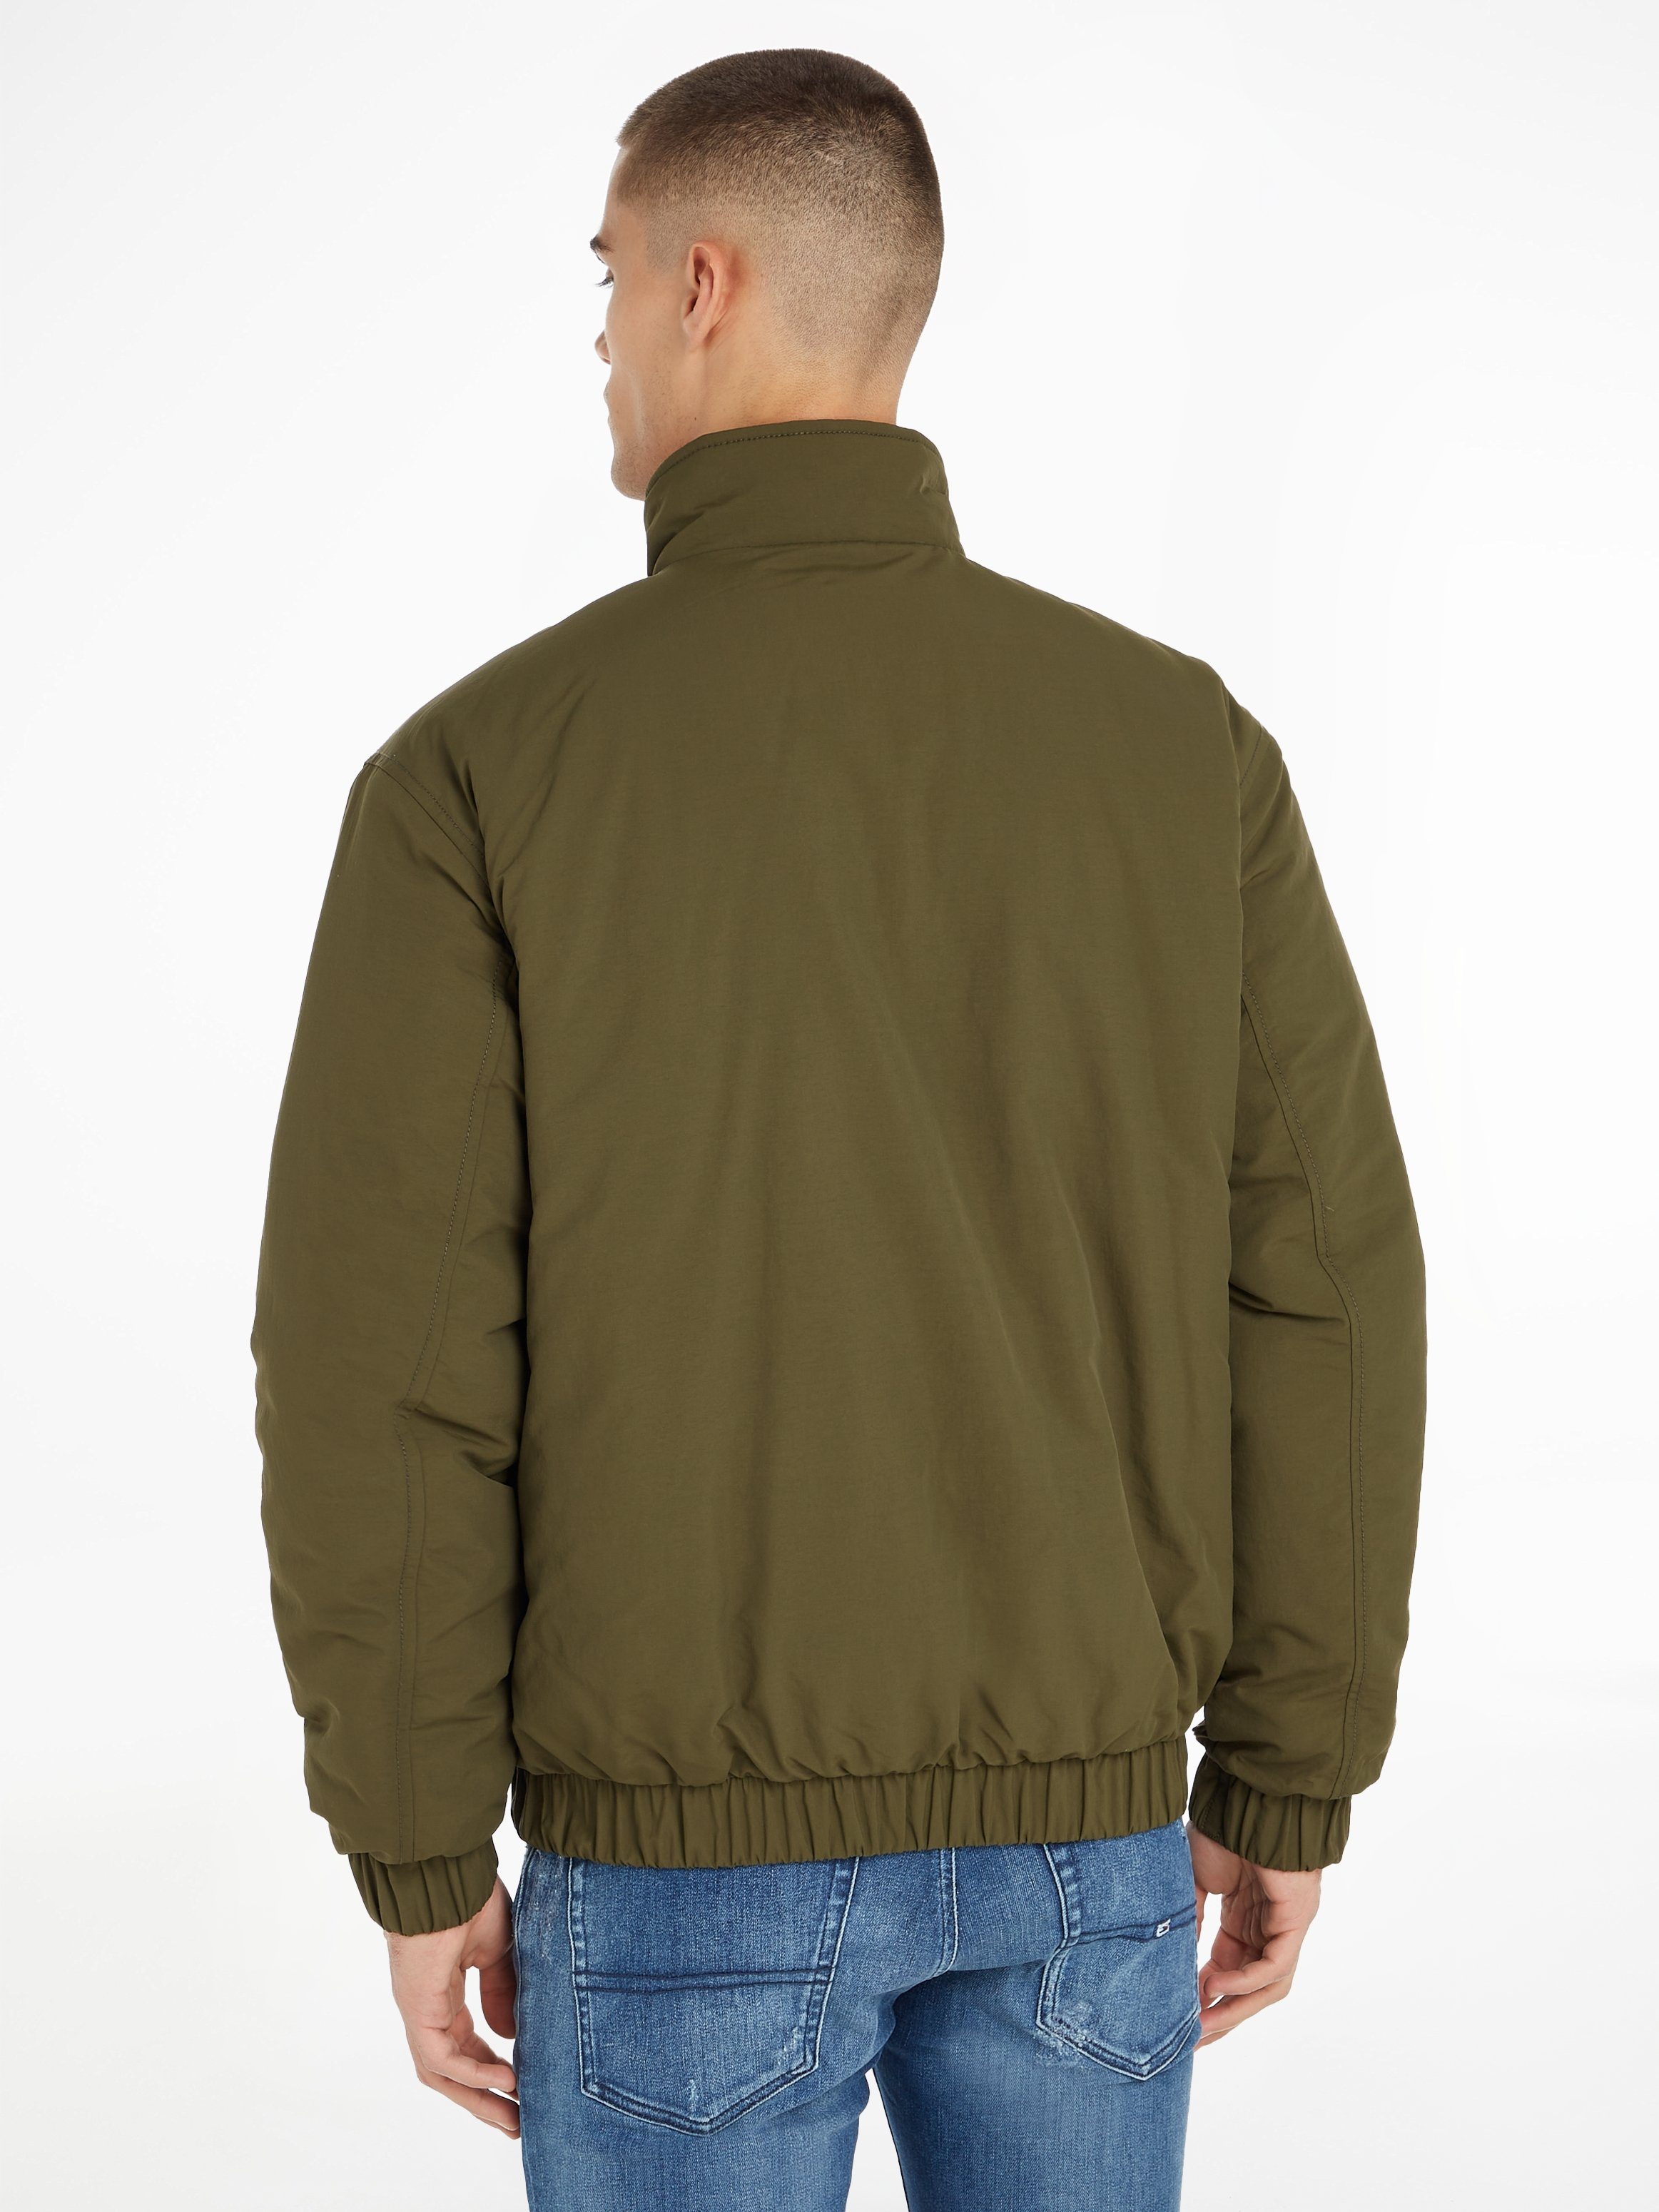 PADDED JACKET Jeans ESSENTIAL Blouson Green Olive Drab Tommy TJM